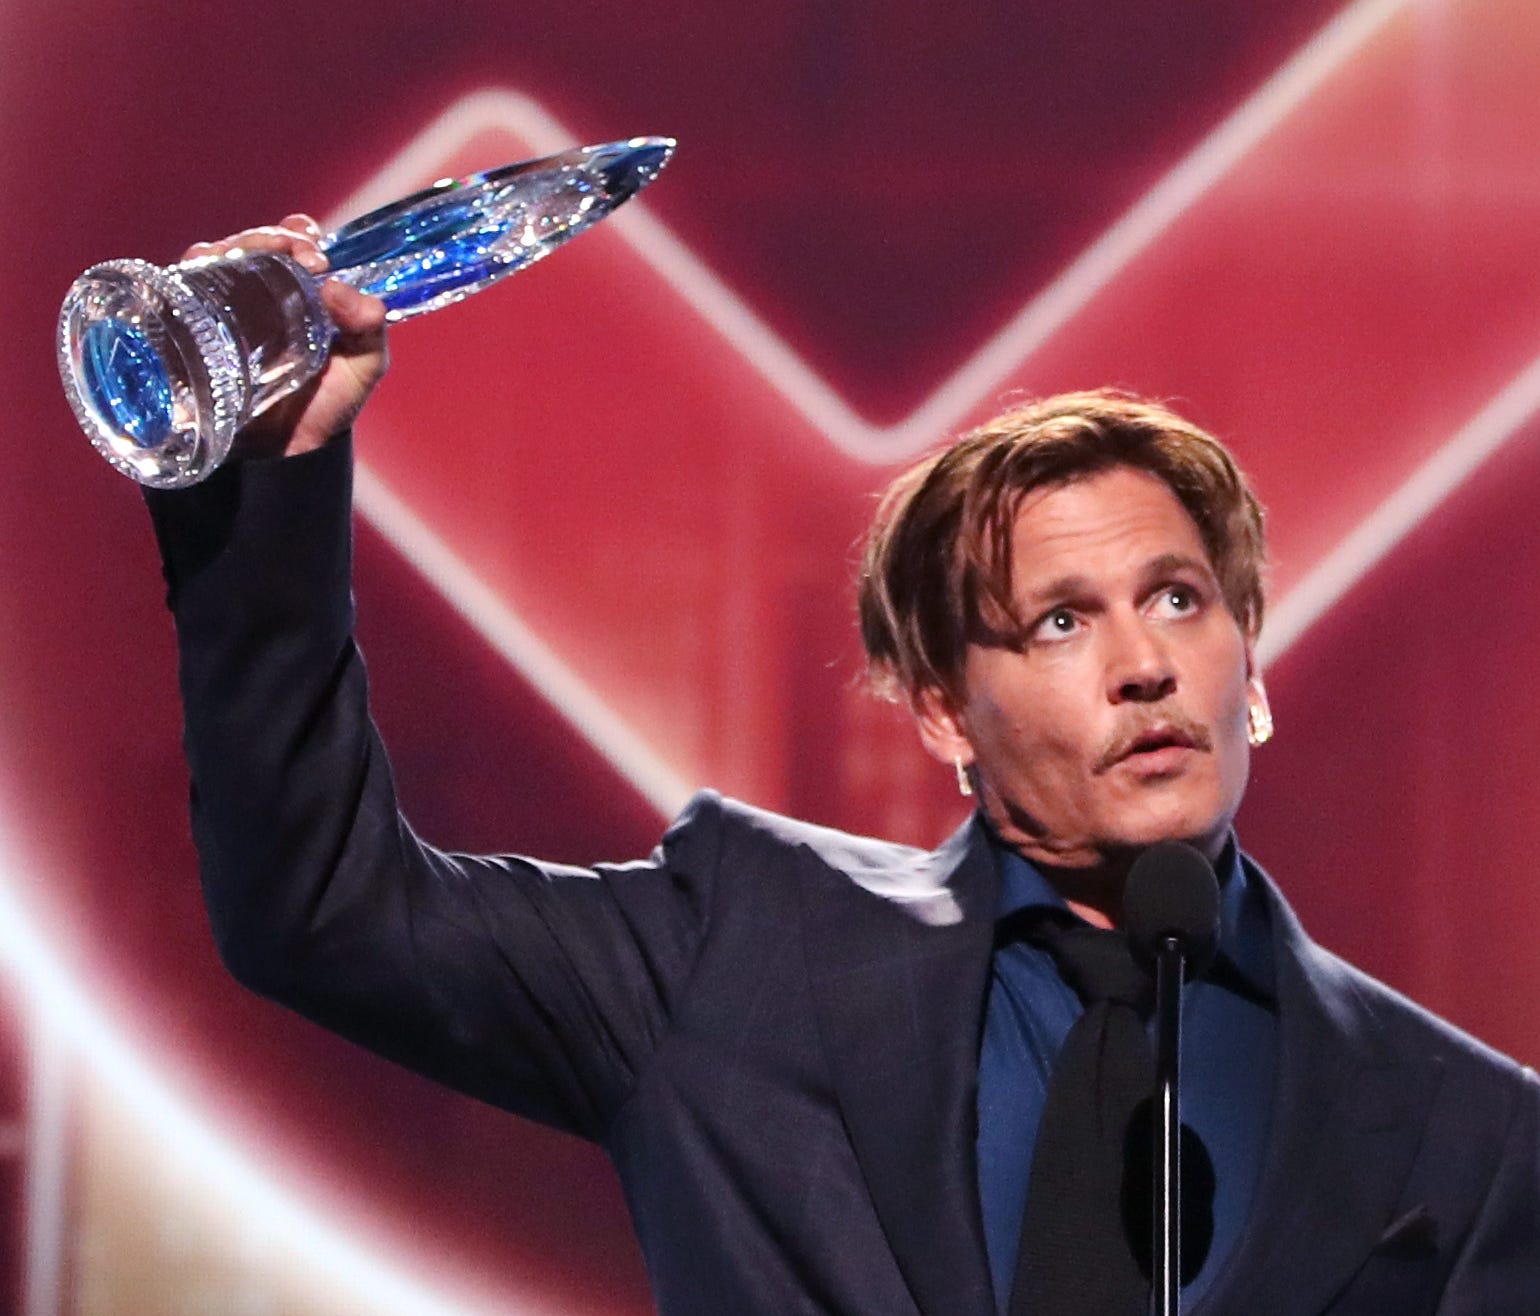 Johnny Depp accepts Favorite Movie Icon at the People's Choice Awards.